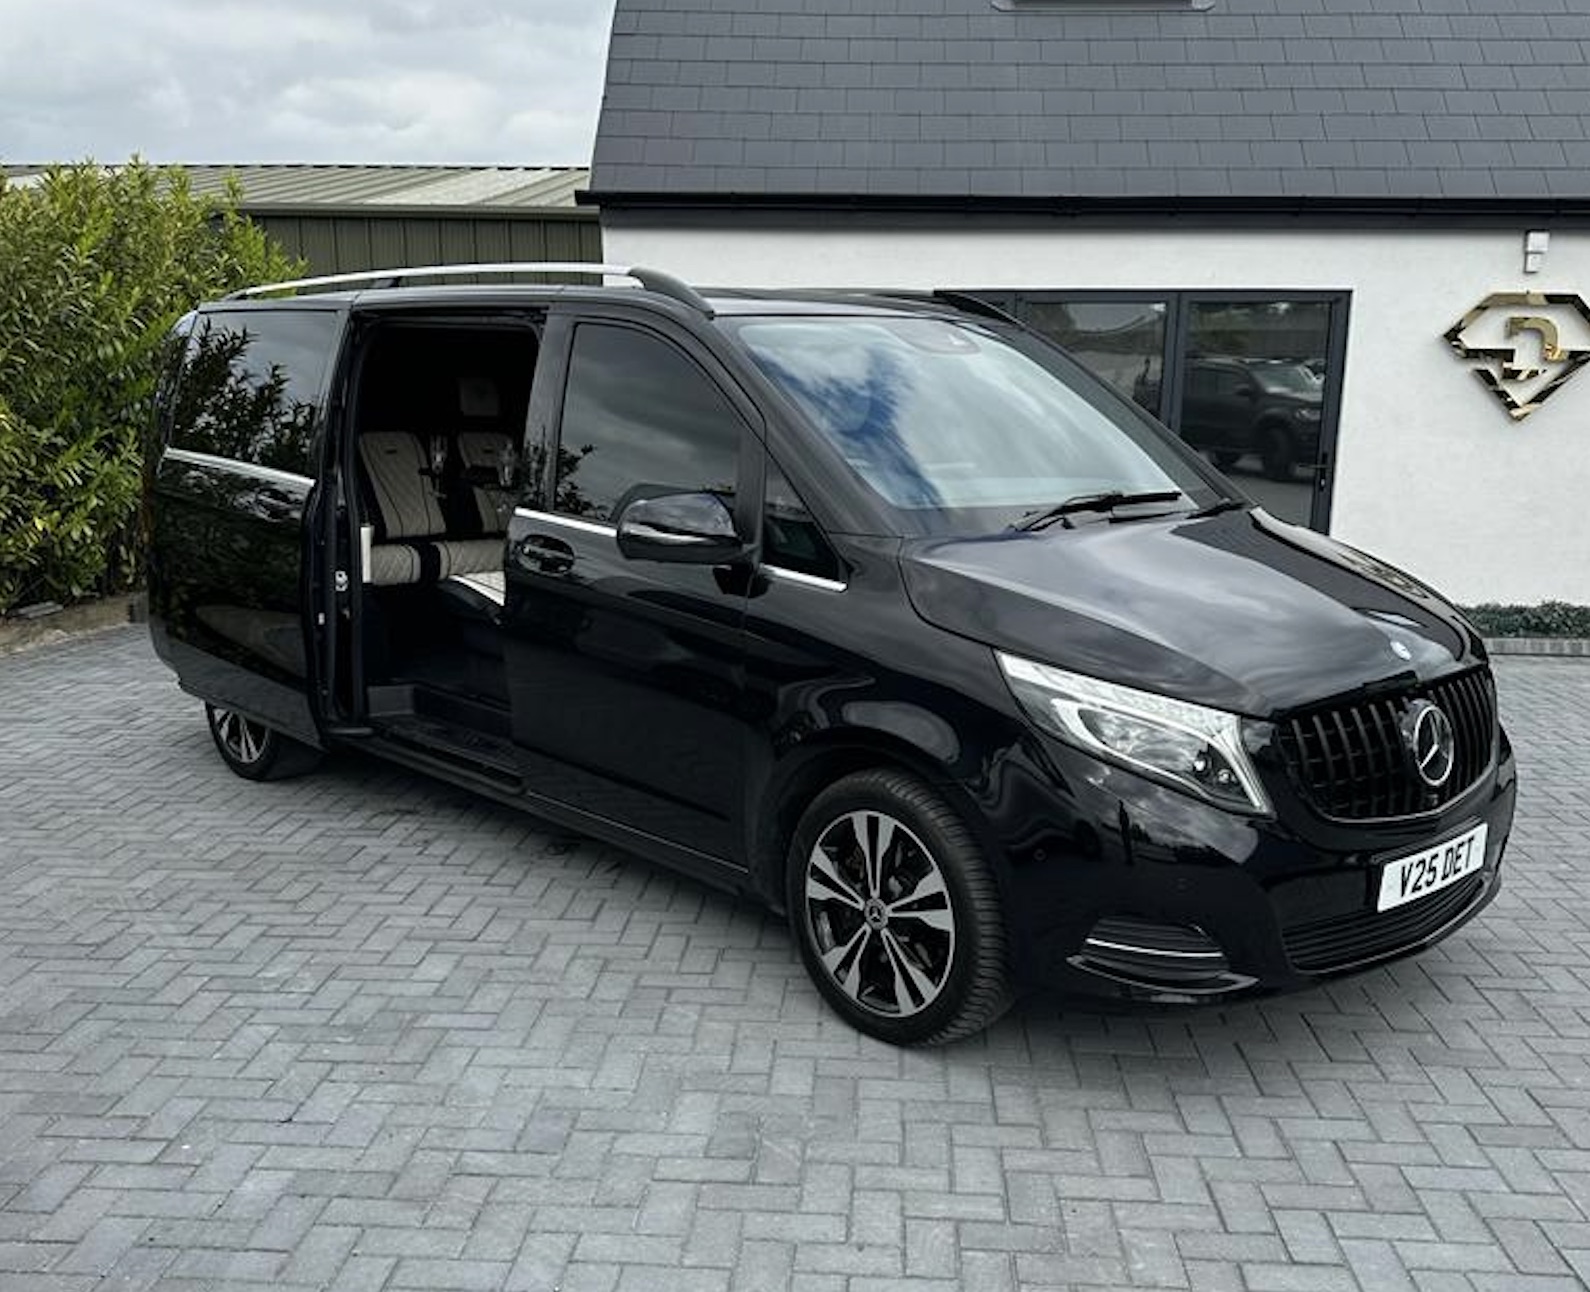 Mercedes V-Class Hire in Cardiff